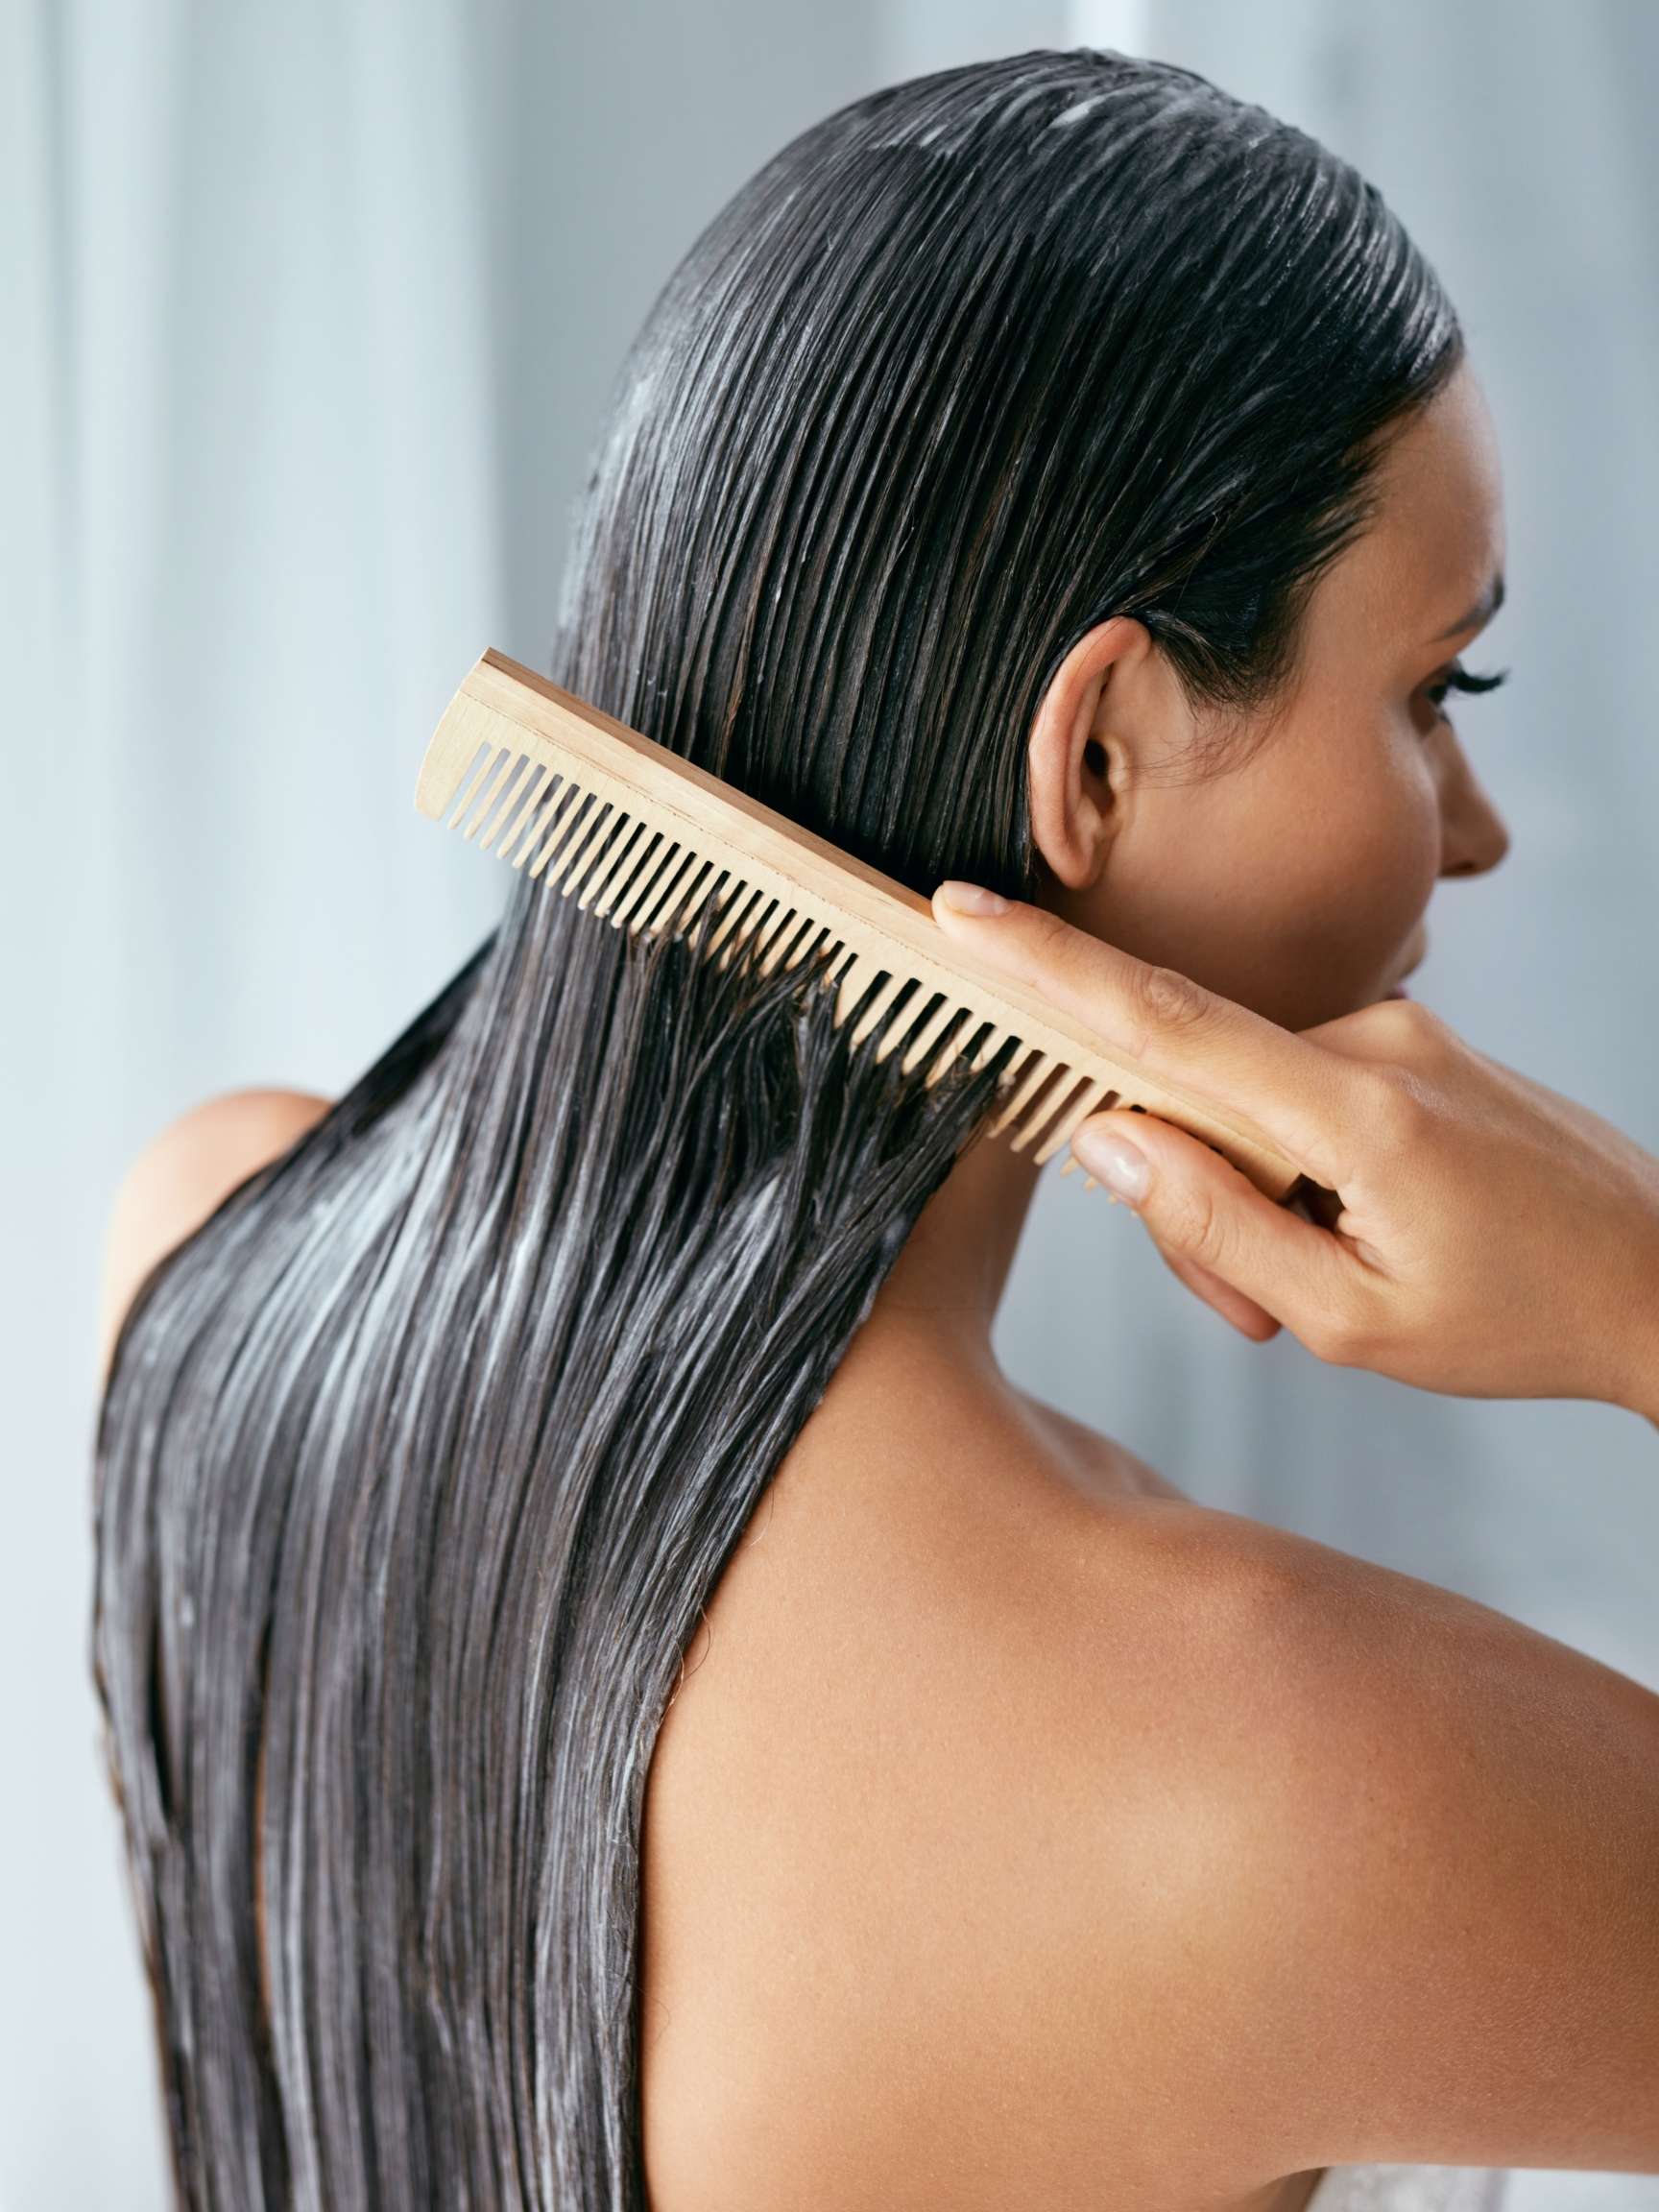 Treatments to Repair Your Damaged Hair